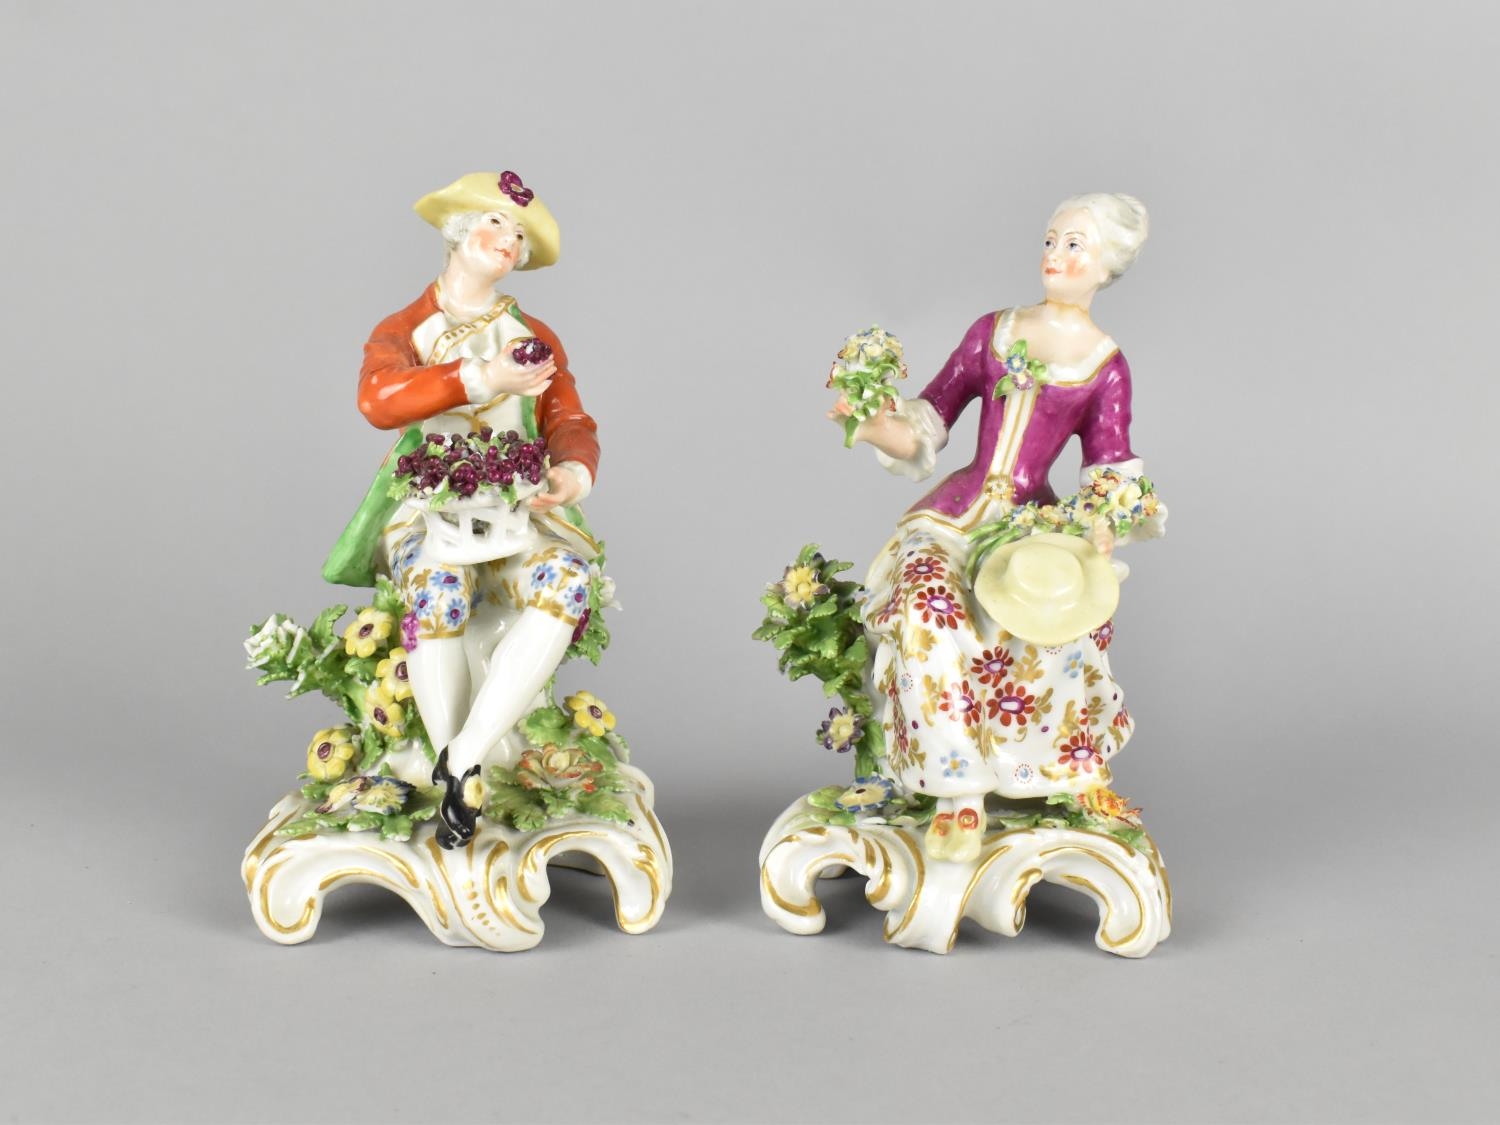 A Near Pair of Continental Porcelain Figures Modelled as Dandy and Lady with Flowers, 17cm high